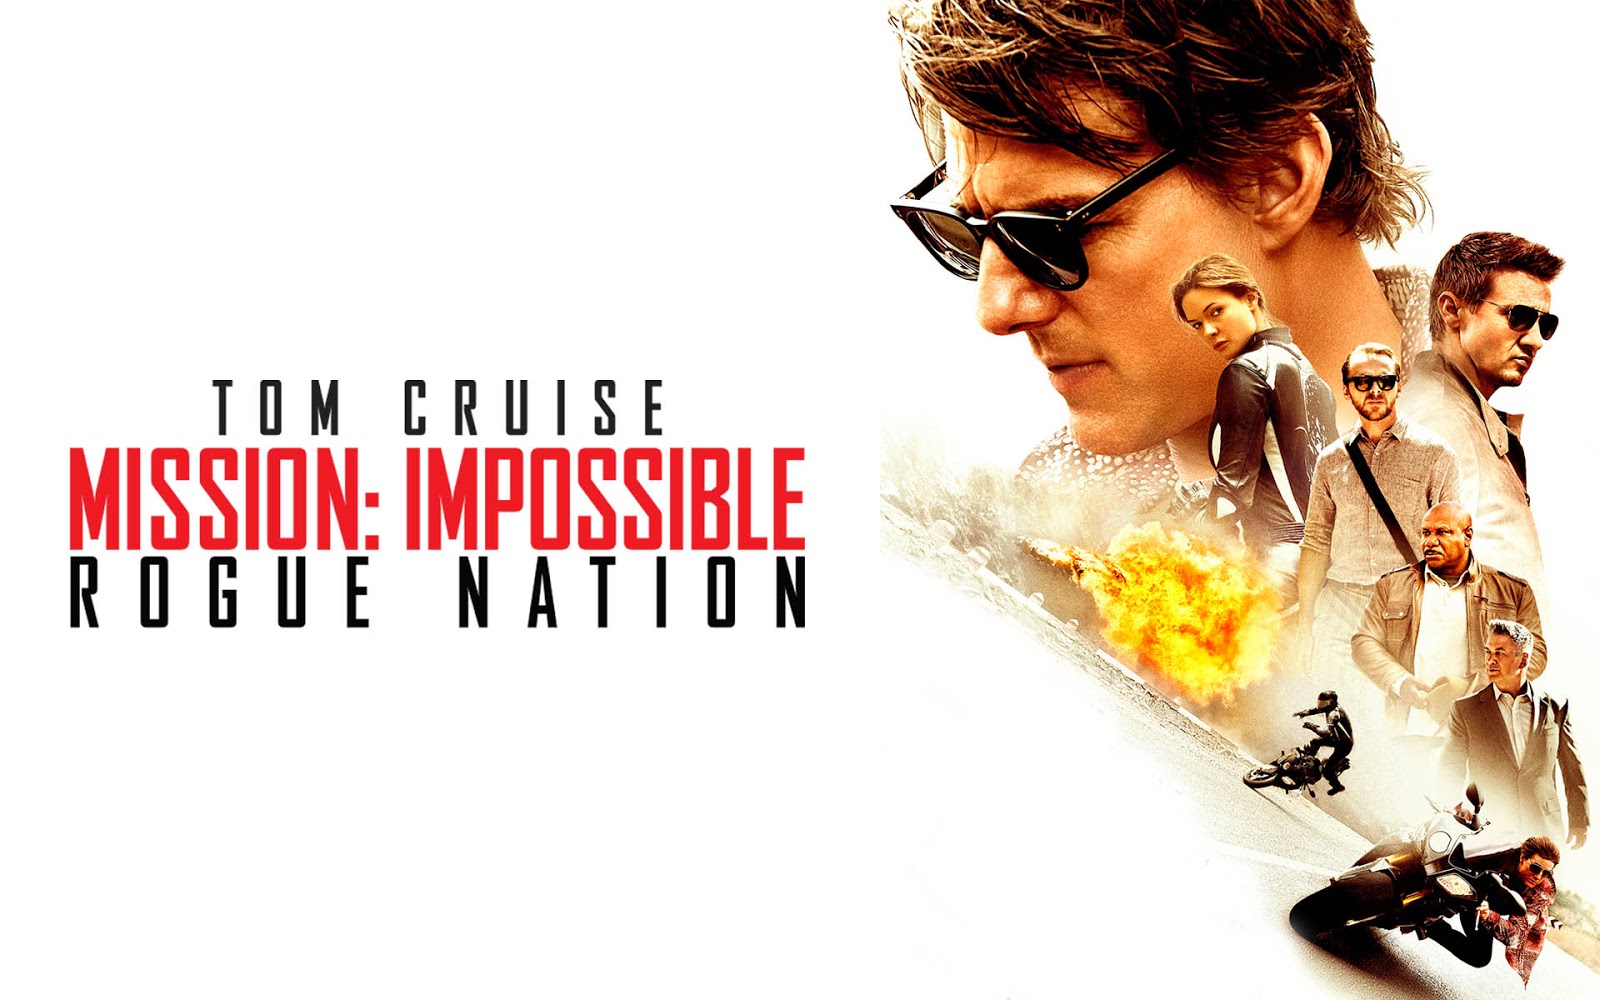 Mission: Impossible Nation wallpaper, Movie, HQ Mission: Impossible Nation pictureK Wallpaper 2019